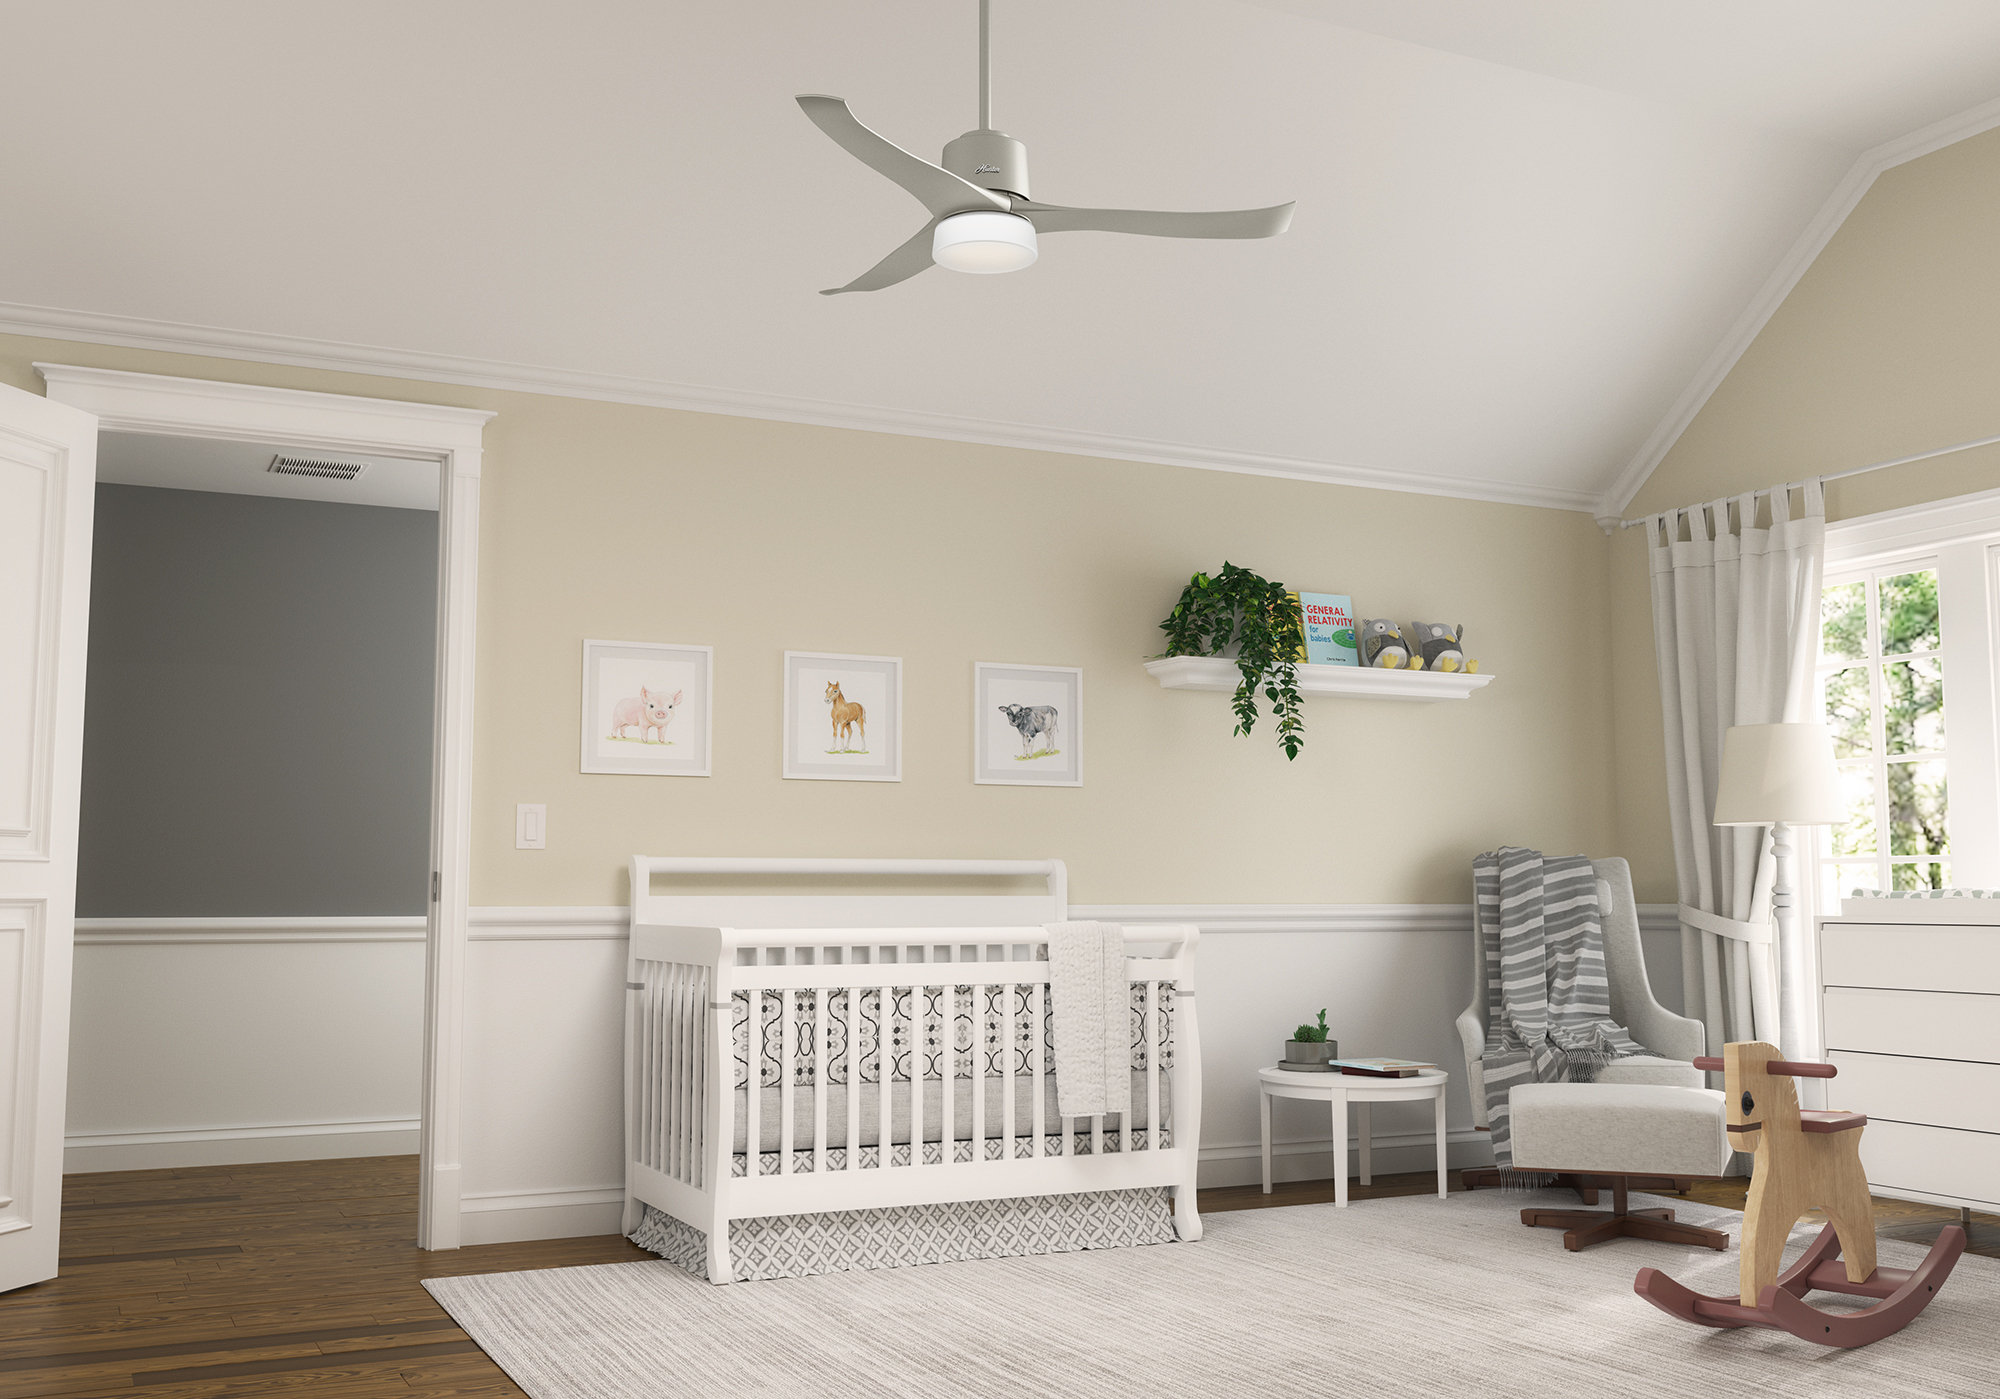 Crib Rocking Chair Ceiling Fan Getting Your Bas Room intended for sizing 2000 X 1399